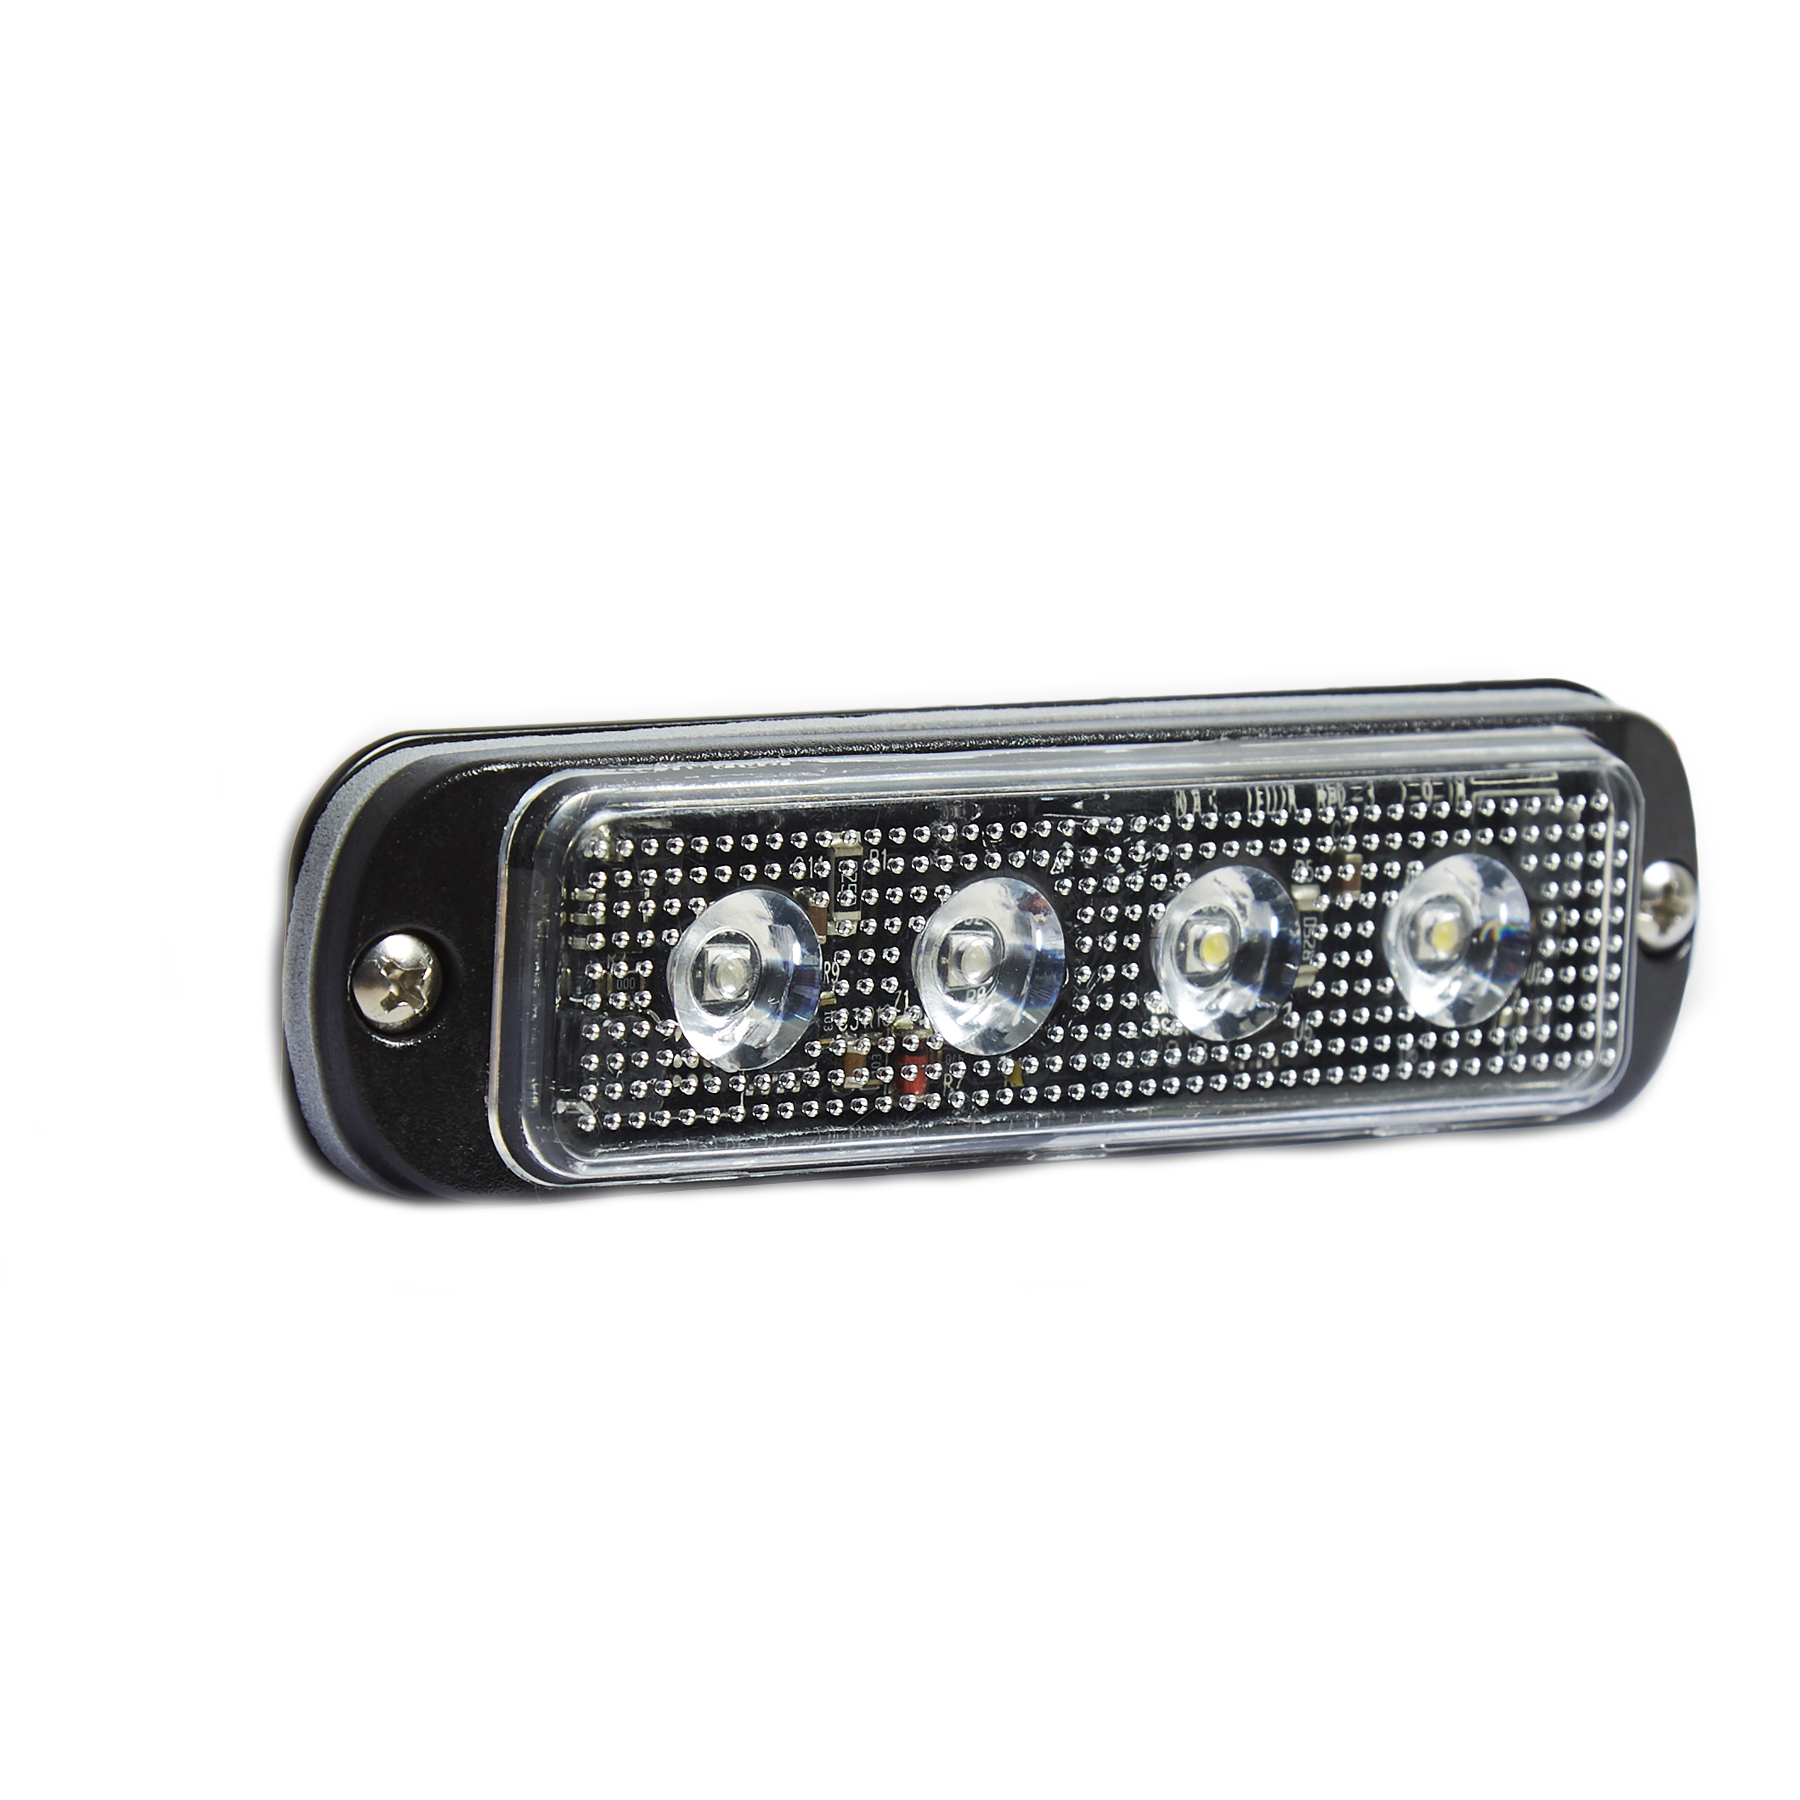 North American Signal LED Surface Mount Warning Light from Columbia Safety